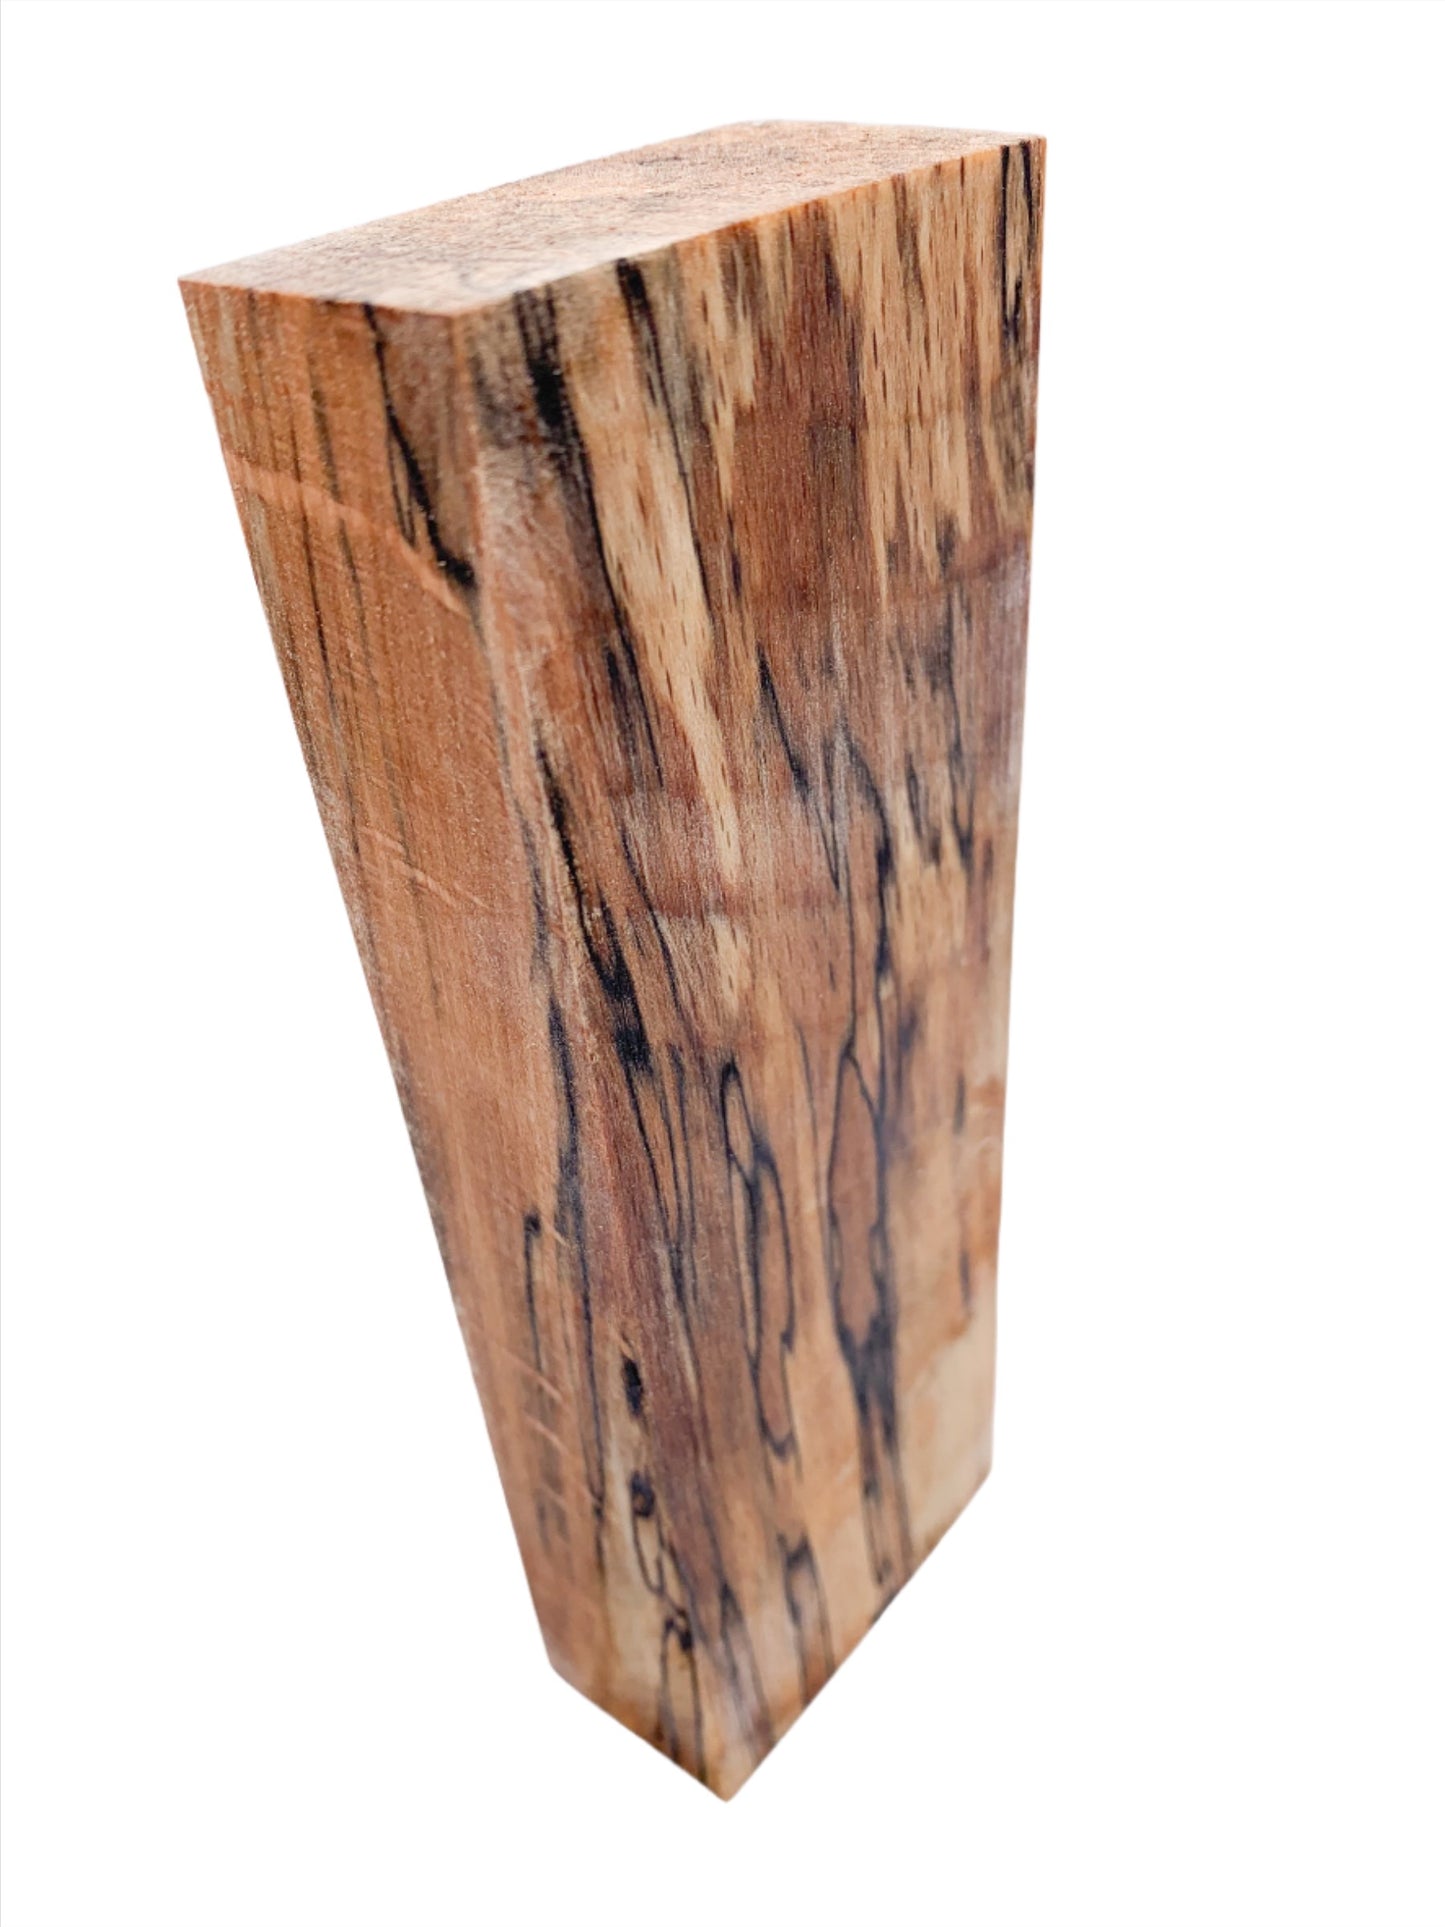 Spalted Beech Wood Knife Scale / Craft Blank | Fully Stabilised | 160x56x28 | Wooden Knife Handle